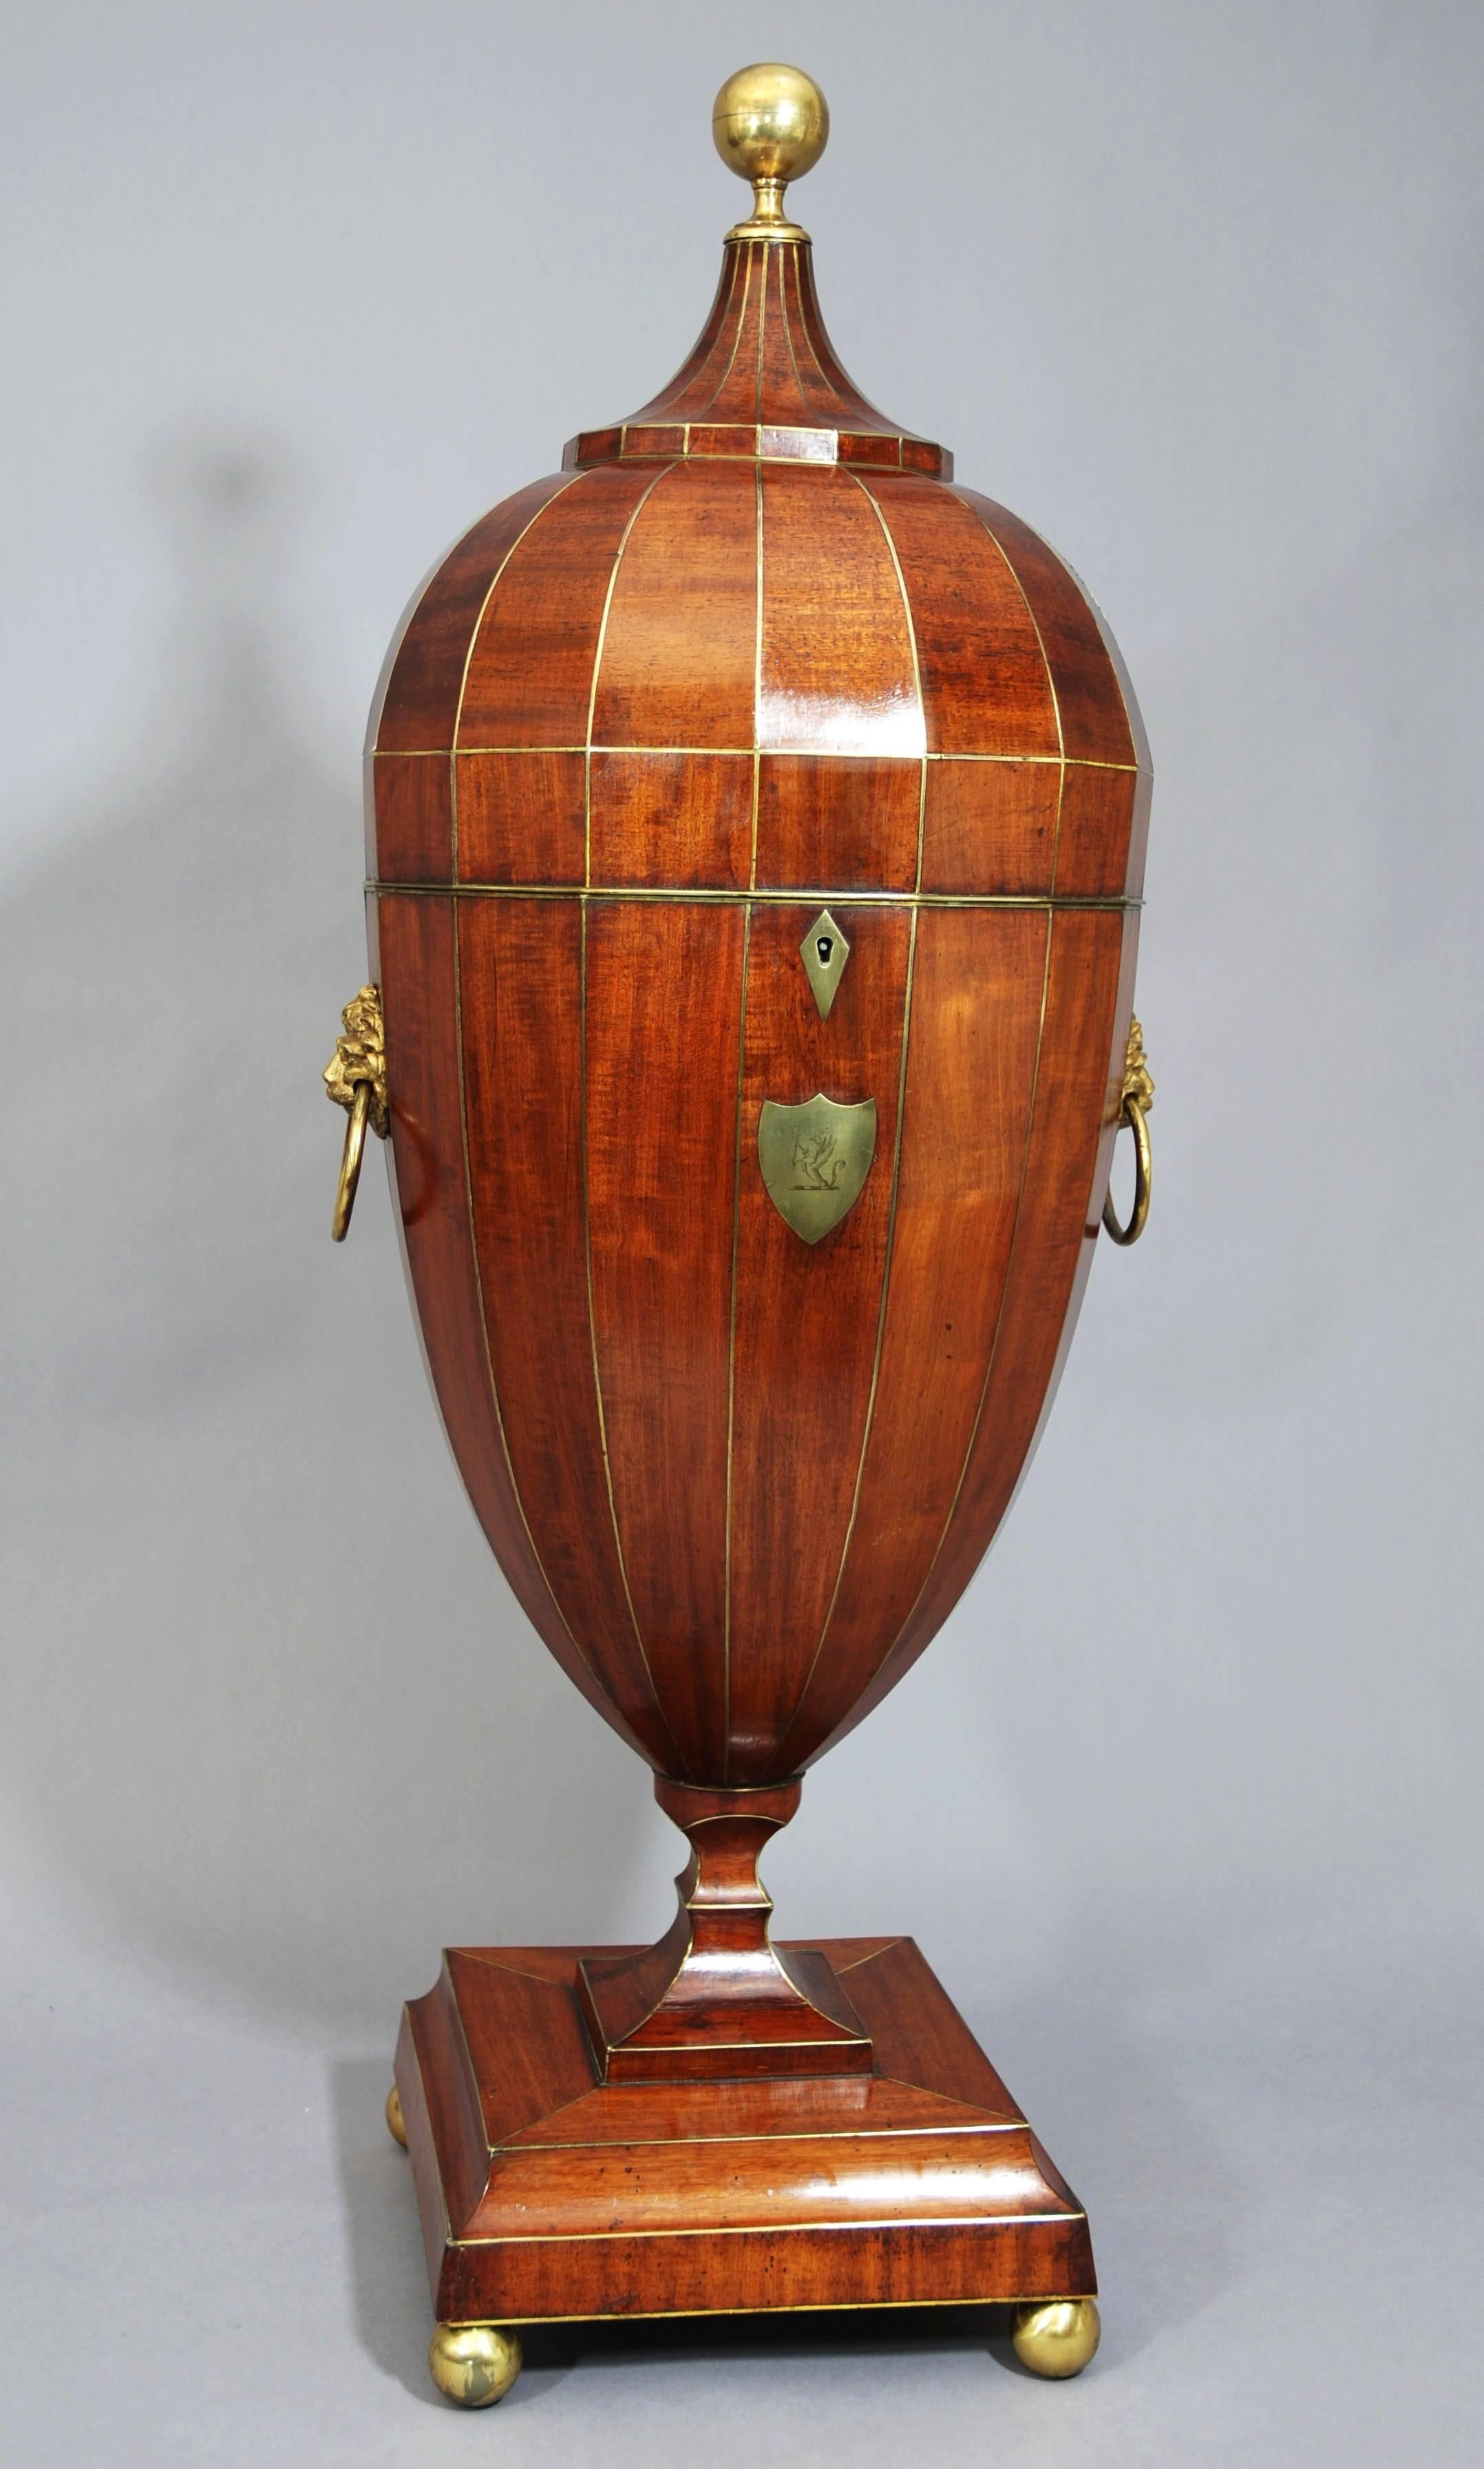 An exceptionally rare superb quality late 18th to early 19th century mahogany cutlery urn with brass line inlay of extremely large proportion, probably English or Russian. 

This piece consists of a turned gilt brass ball finial leading down to a